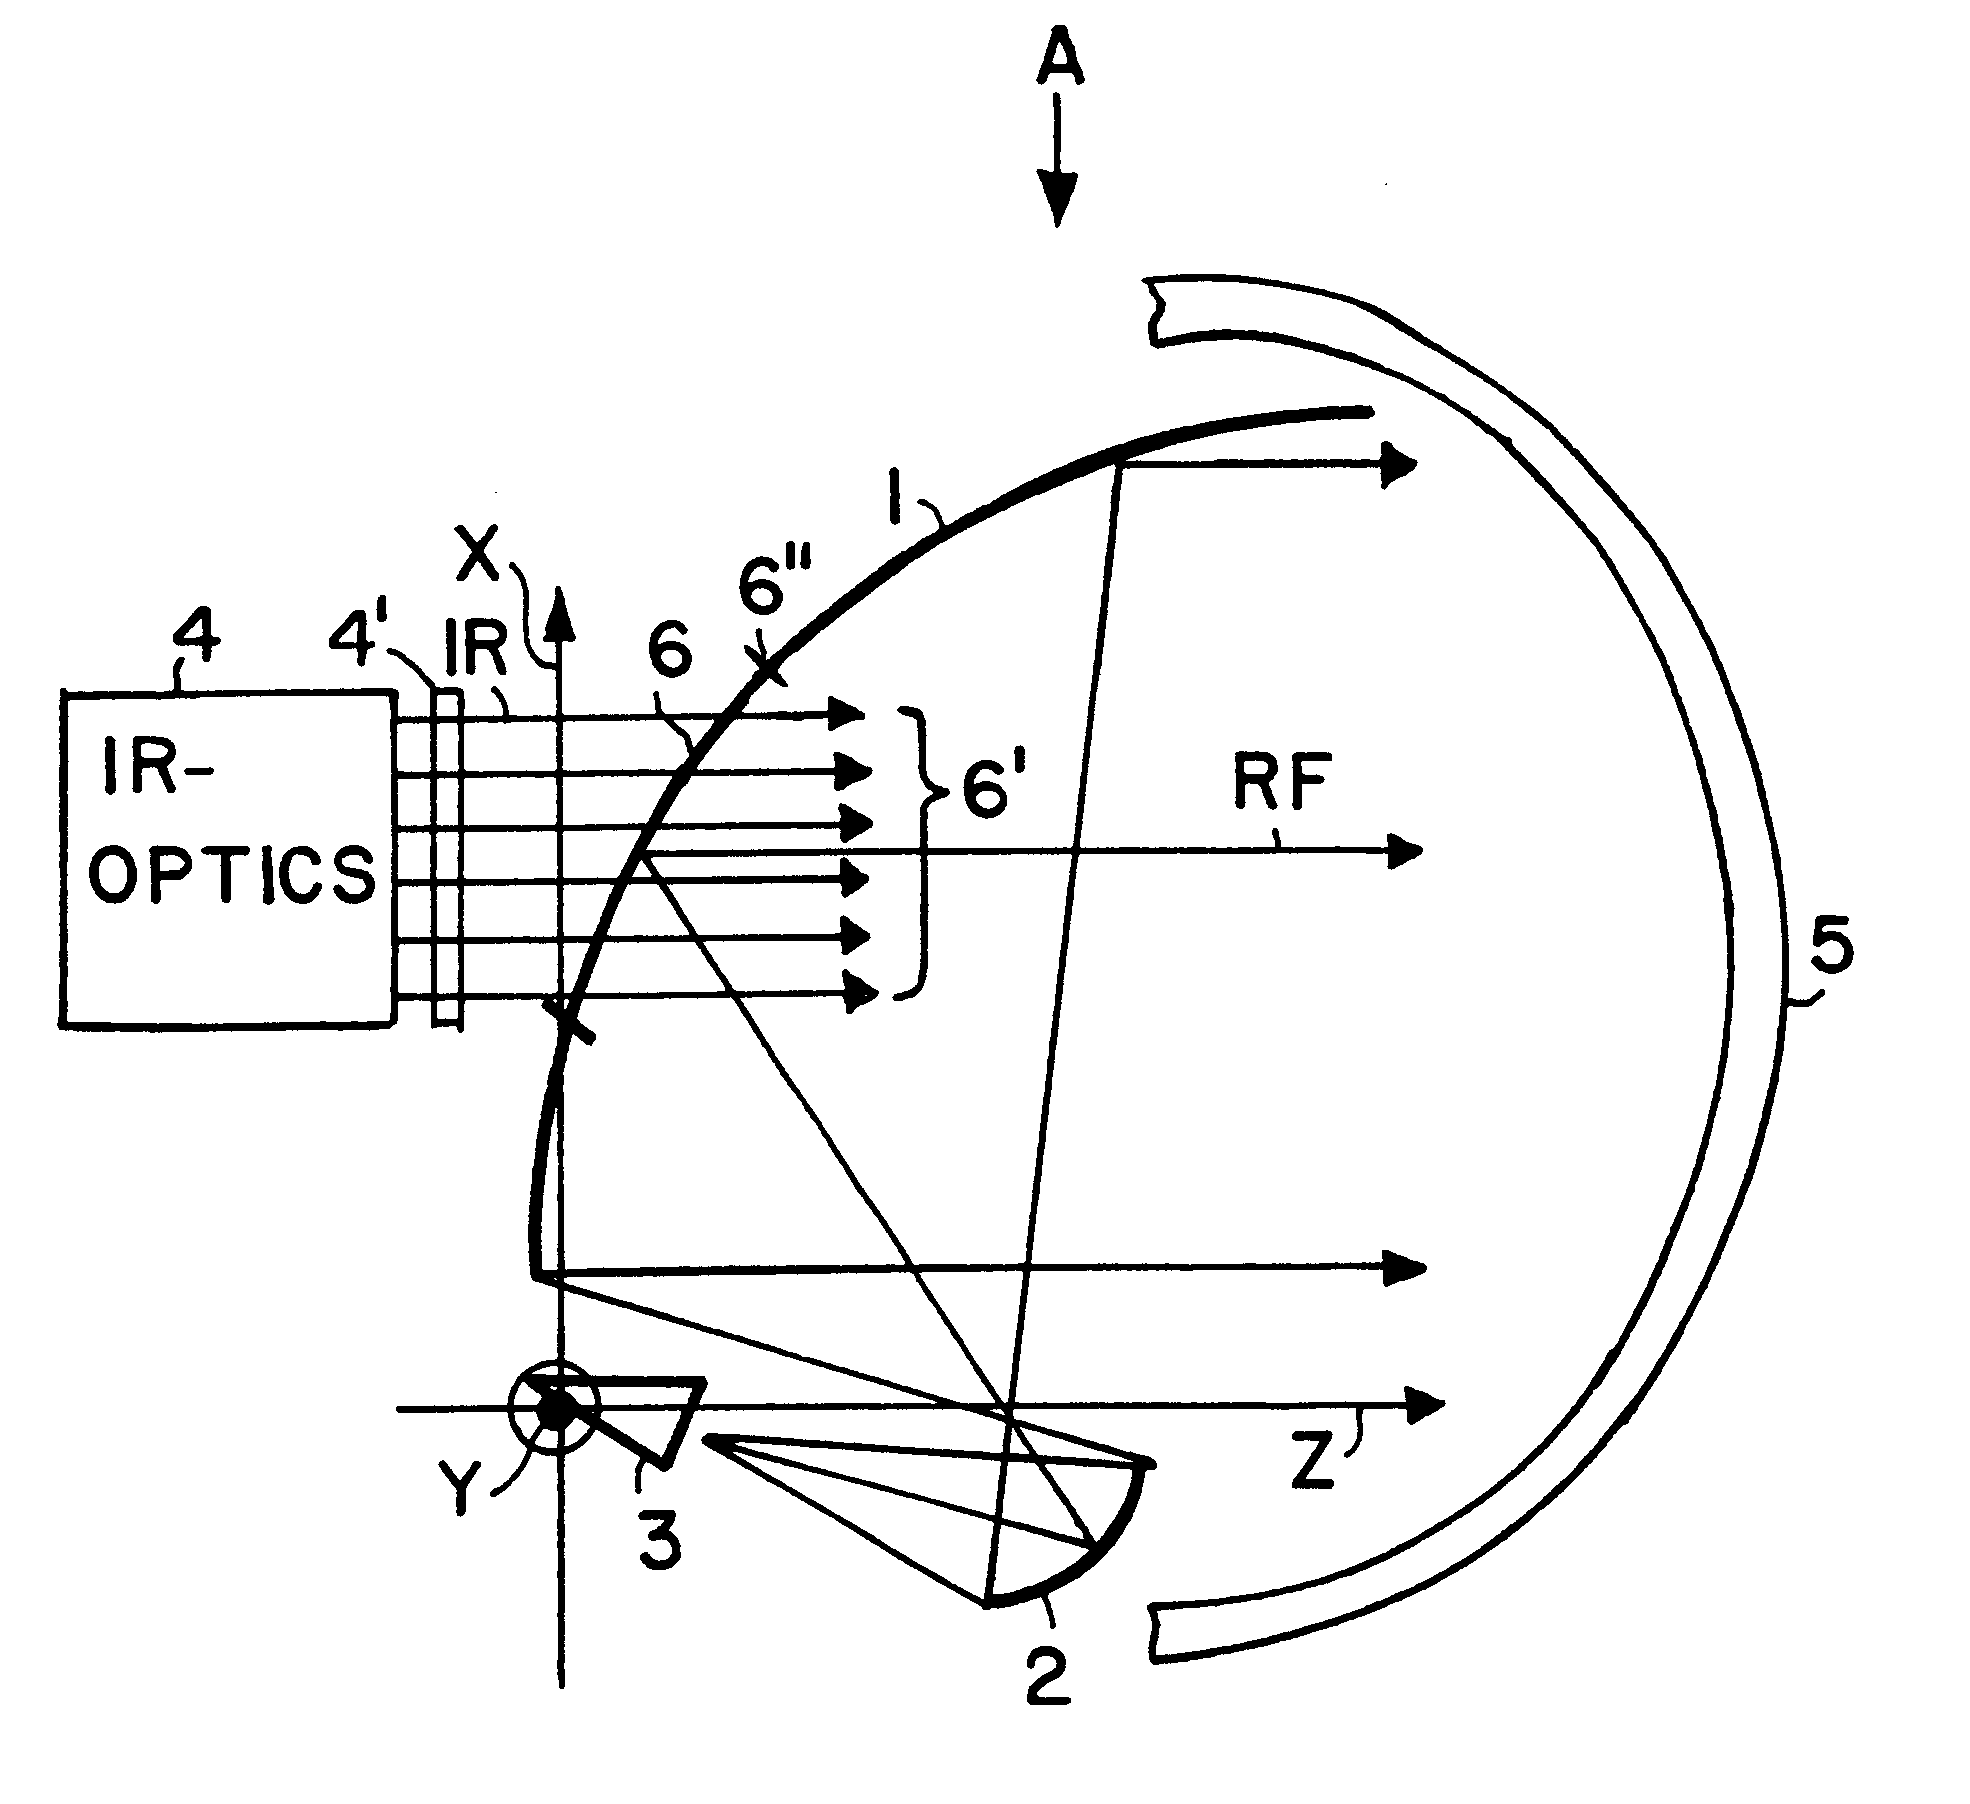 RF and IR bispectral window and reflector antenna arrangement including the same